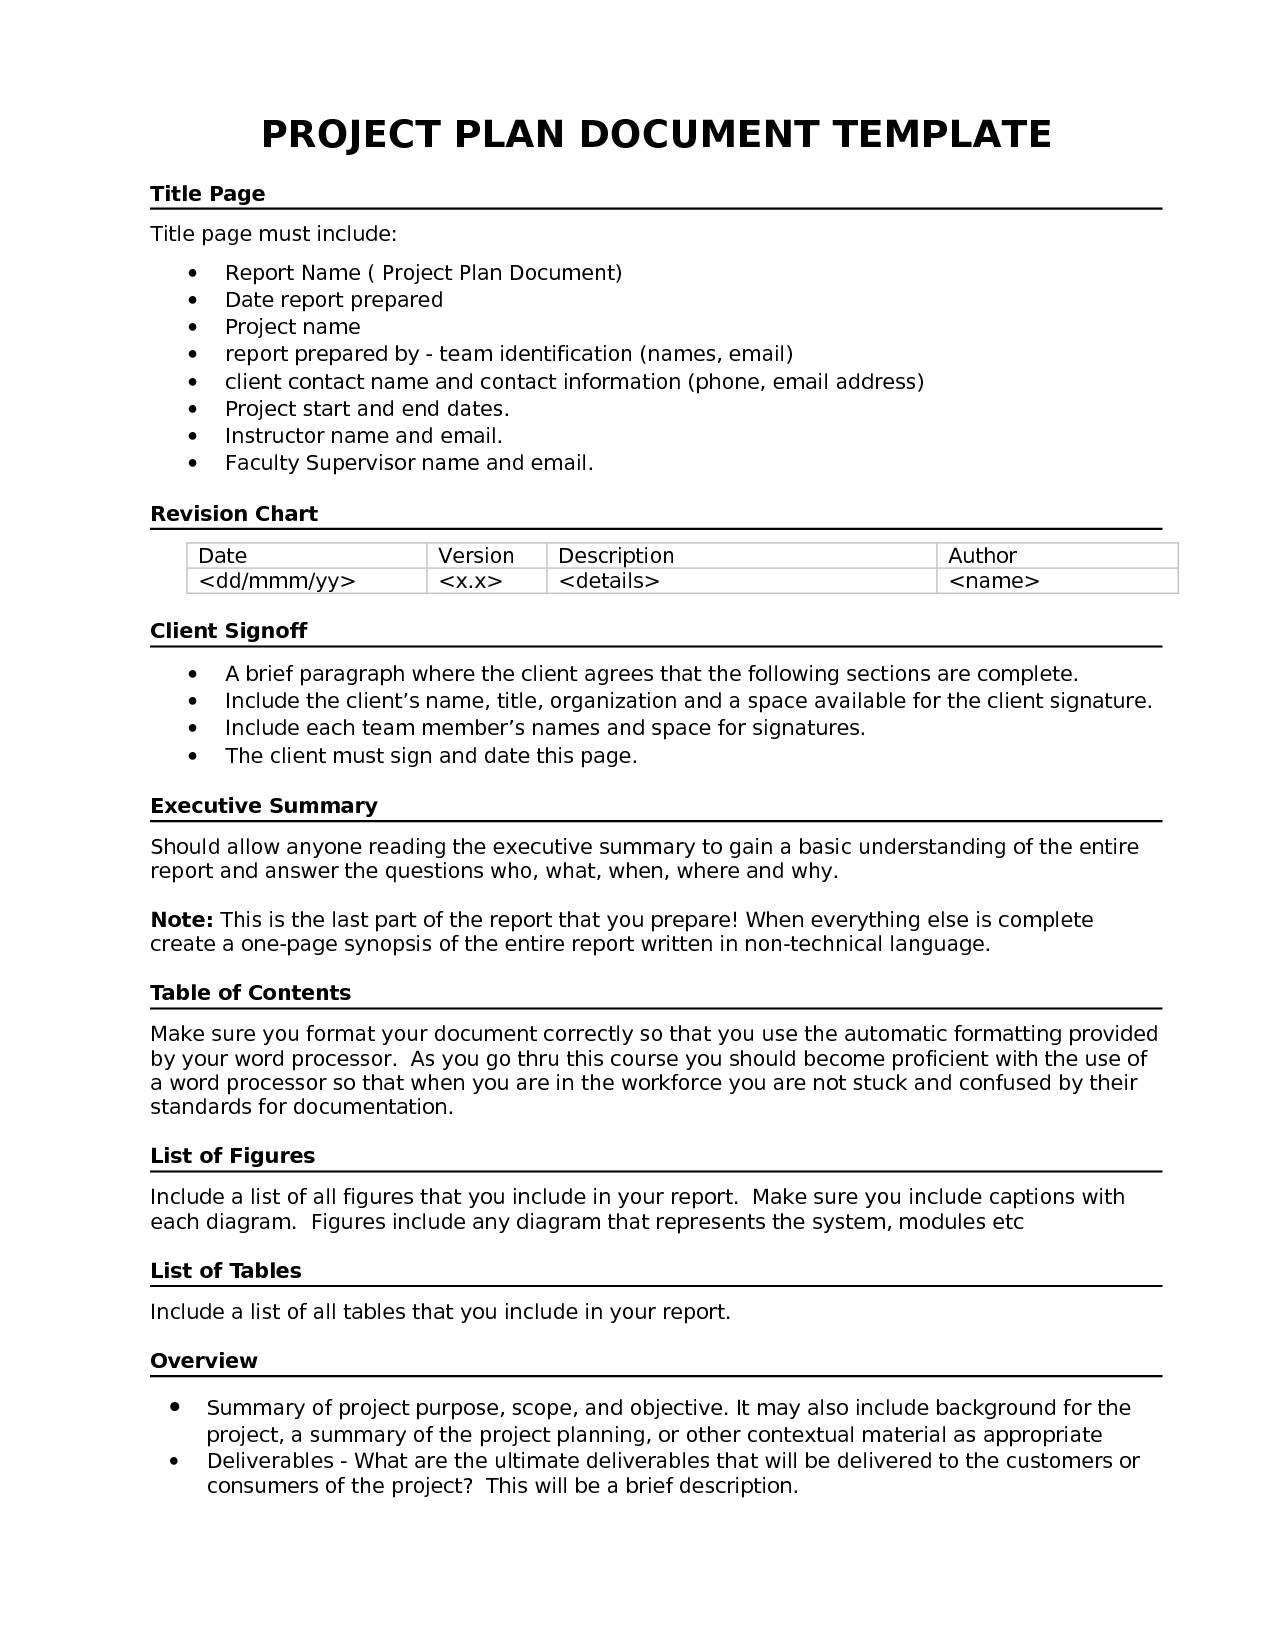 project plan document template